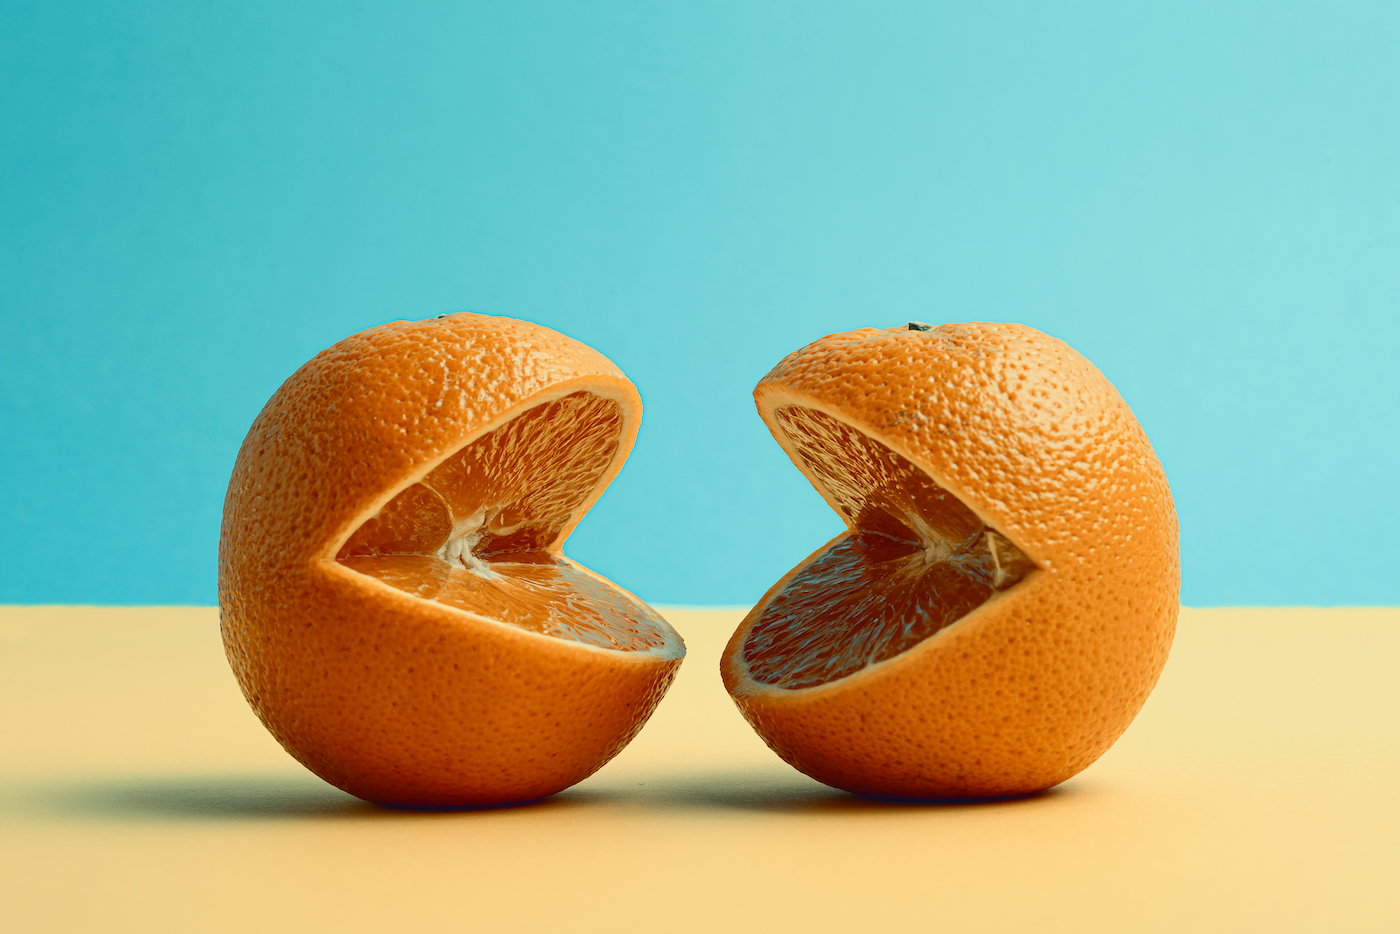 Concept of discussion between two oranges.Studio shot